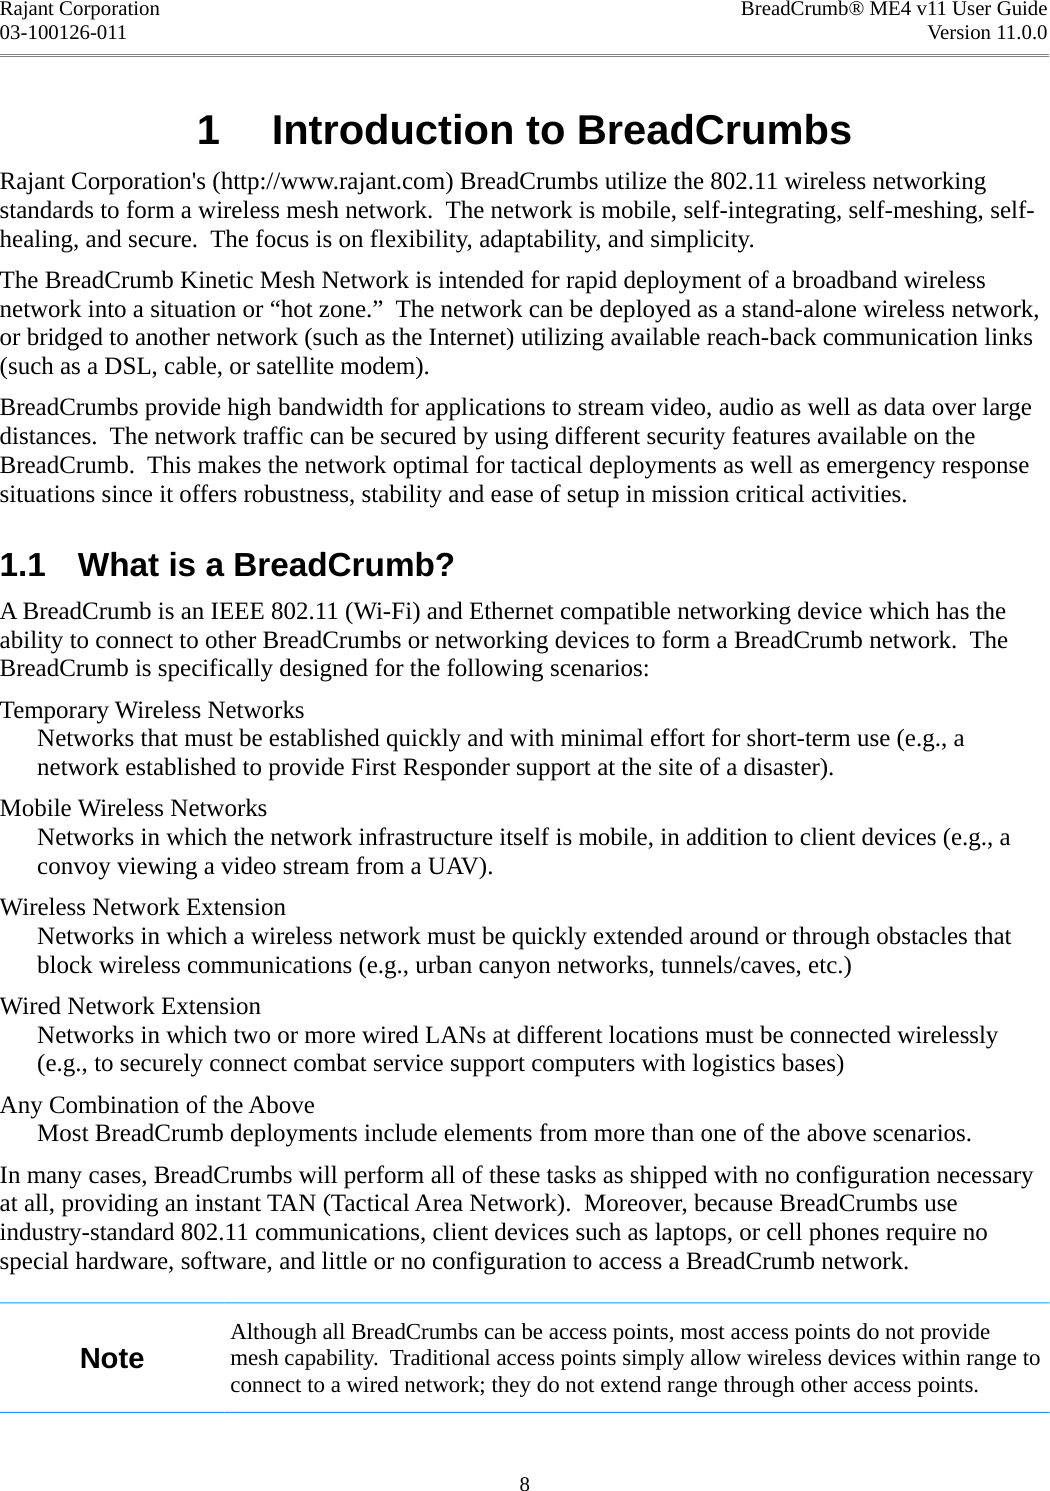 Rajant Corporation BreadCrumb® ME4 v11 User Guide03-100126-011 Version 11.0.01  Introduction to BreadCrumbsRajant Corporation&apos;s (http://www.rajant.com) BreadCrumbs utilize the 802.11 wireless networking standards to form a wireless mesh network.  The network is mobile, self-integrating, self-meshing, self-healing, and secure.  The focus is on flexibility, adaptability, and simplicity.The BreadCrumb Kinetic Mesh Network is intended for rapid deployment of a broadband wireless network into a situation or “hot zone.”  The network can be deployed as a stand-alone wireless network, or bridged to another network (such as the Internet) utilizing available reach-back communication links (such as a DSL, cable, or satellite modem).BreadCrumbs provide high bandwidth for applications to stream video, audio as well as data over large distances.  The network traffic can be secured by using different security features available on the BreadCrumb.  This makes the network optimal for tactical deployments as well as emergency response situations since it offers robustness, stability and ease of setup in mission critical activities.1.1  What is a BreadCrumb?A BreadCrumb is an IEEE 802.11 (Wi-Fi) and Ethernet compatible networking device which has the ability to connect to other BreadCrumbs or networking devices to form a BreadCrumb network.  The BreadCrumb is specifically designed for the following scenarios:Temporary Wireless NetworksNetworks that must be established quickly and with minimal effort for short-term use (e.g., a network established to provide First Responder support at the site of a disaster).Mobile Wireless NetworksNetworks in which the network infrastructure itself is mobile, in addition to client devices (e.g., a convoy viewing a video stream from a UAV).Wireless Network ExtensionNetworks in which a wireless network must be quickly extended around or through obstacles that block wireless communications (e.g., urban canyon networks, tunnels/caves, etc.)Wired Network ExtensionNetworks in which two or more wired LANs at different locations must be connected wirelessly (e.g., to securely connect combat service support computers with logistics bases)Any Combination of the AboveMost BreadCrumb deployments include elements from more than one of the above scenarios.In many cases, BreadCrumbs will perform all of these tasks as shipped with no configuration necessary at all, providing an instant TAN (Tactical Area Network).  Moreover, because BreadCrumbs use industry-standard 802.11 communications, client devices such as laptops, or cell phones require no special hardware, software, and little or no configuration to access a BreadCrumb network.NoteAlthough all BreadCrumbs can be access points, most access points do not provide mesh capability.  Traditional access points simply allow wireless devices within range to connect to a wired network; they do not extend range through other access points.8